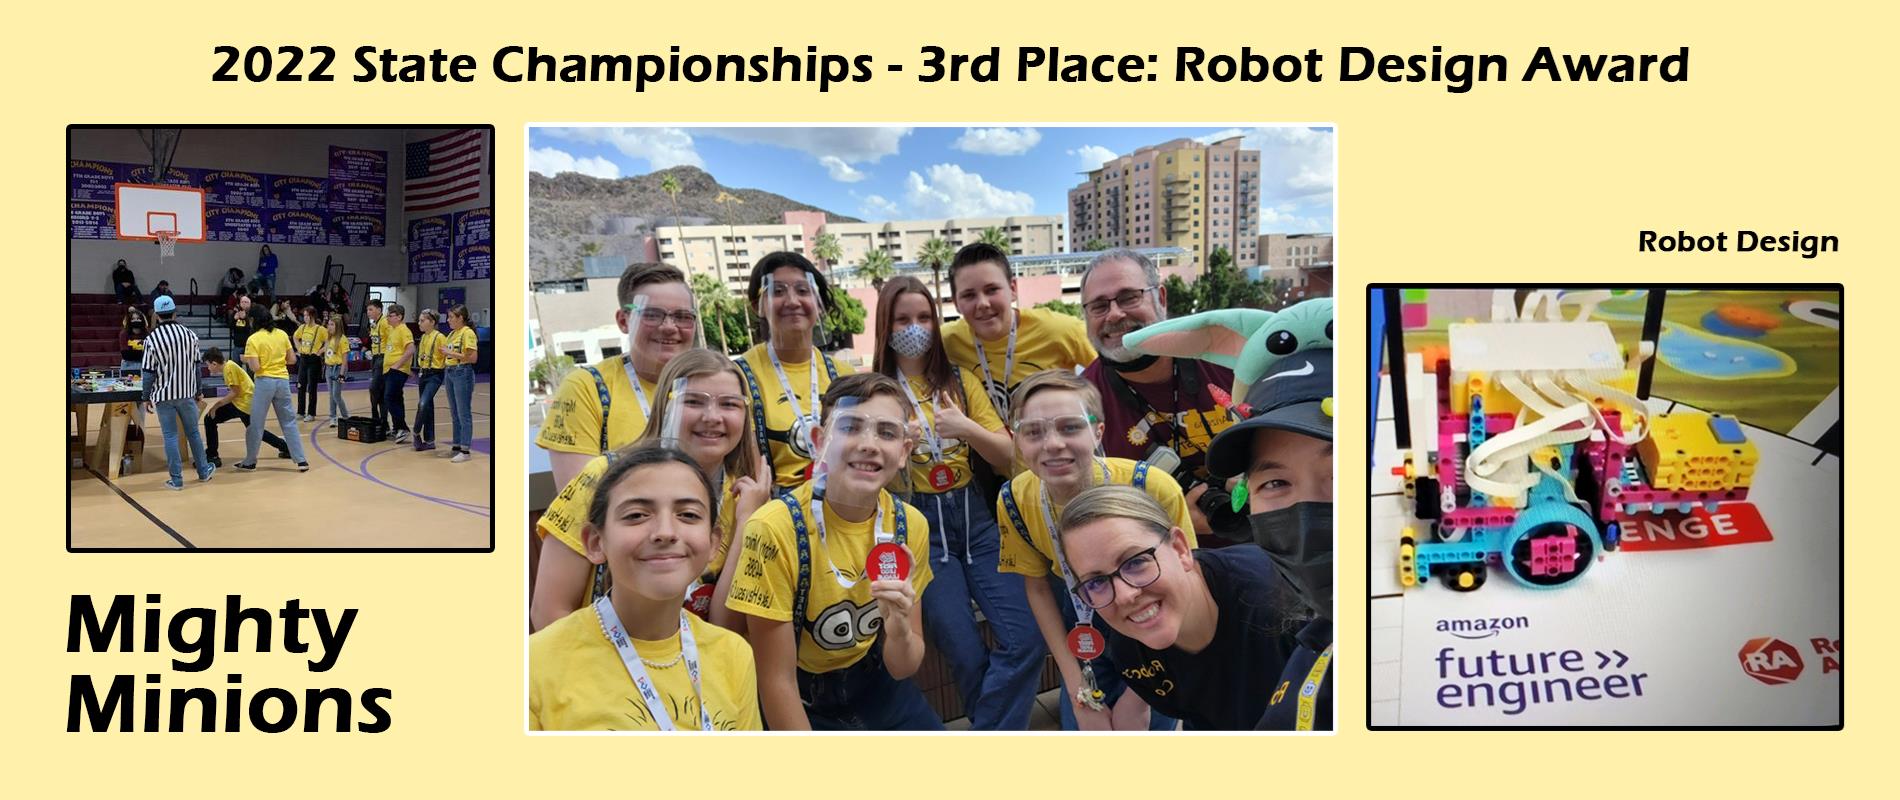 Mighty Minions robotics team takes 3rd (out of 43 teams) in Robot Design at State Championships